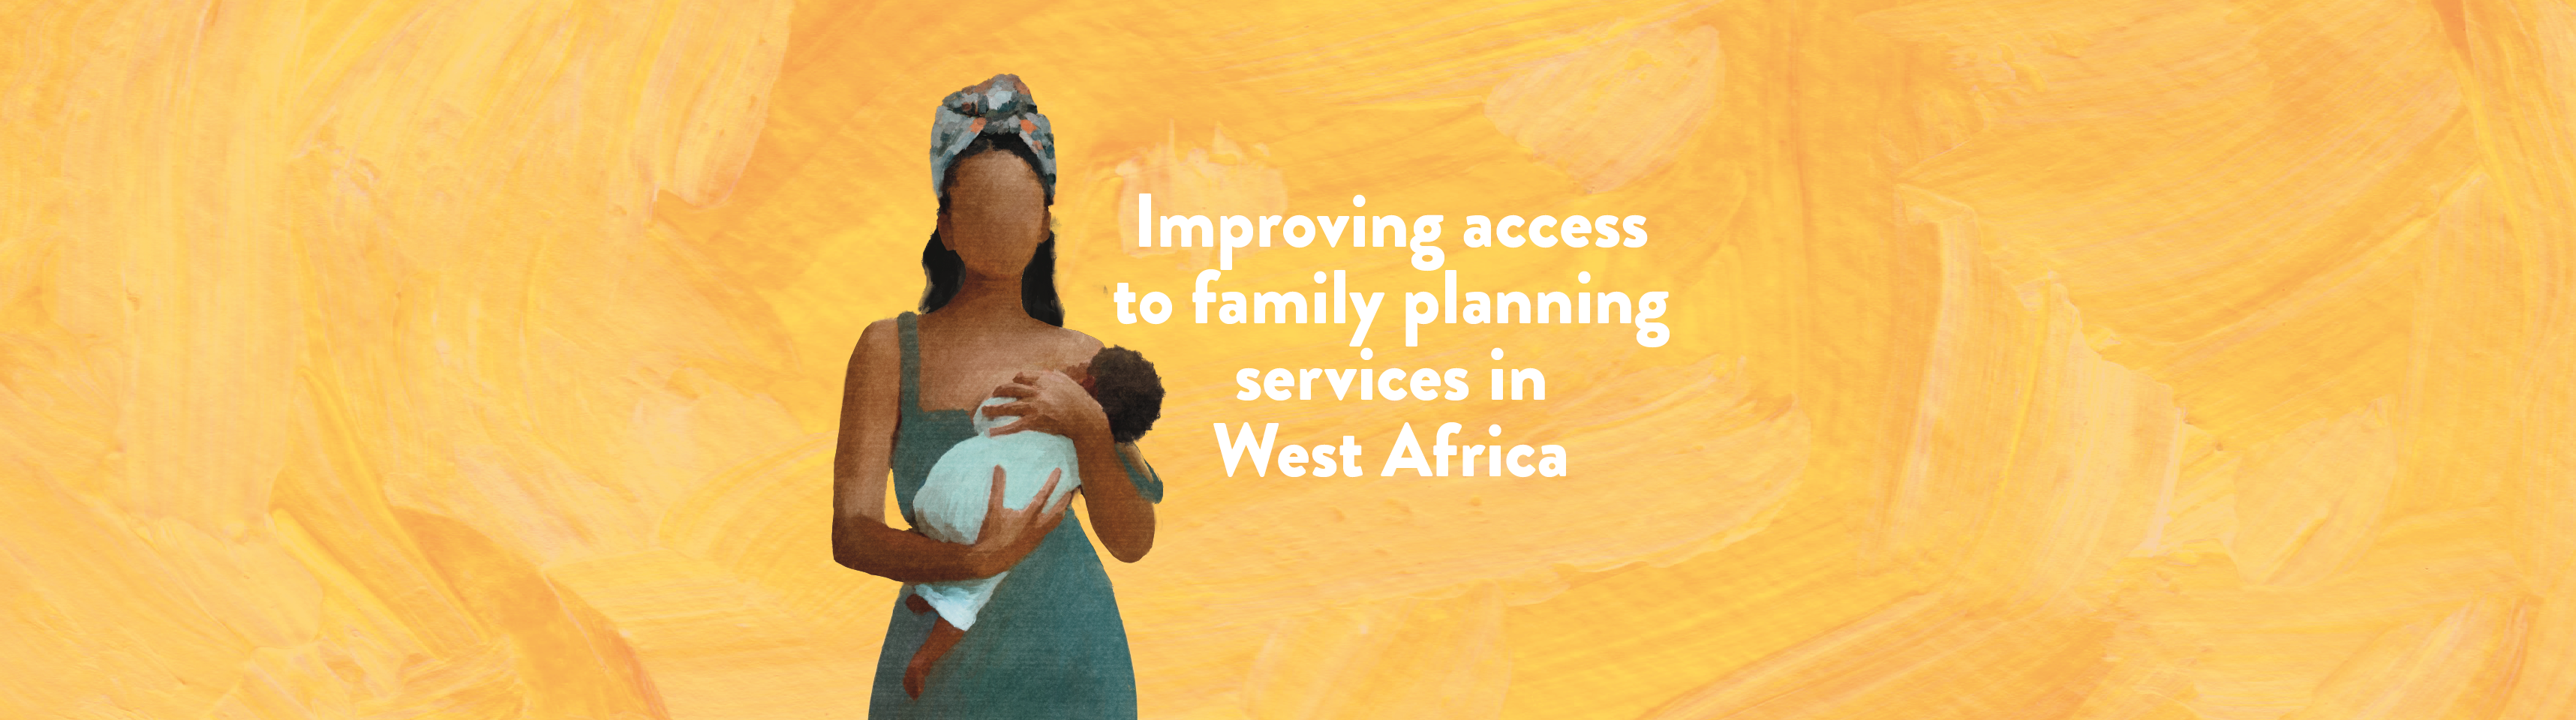 Improving access to family planning services in West Africa 